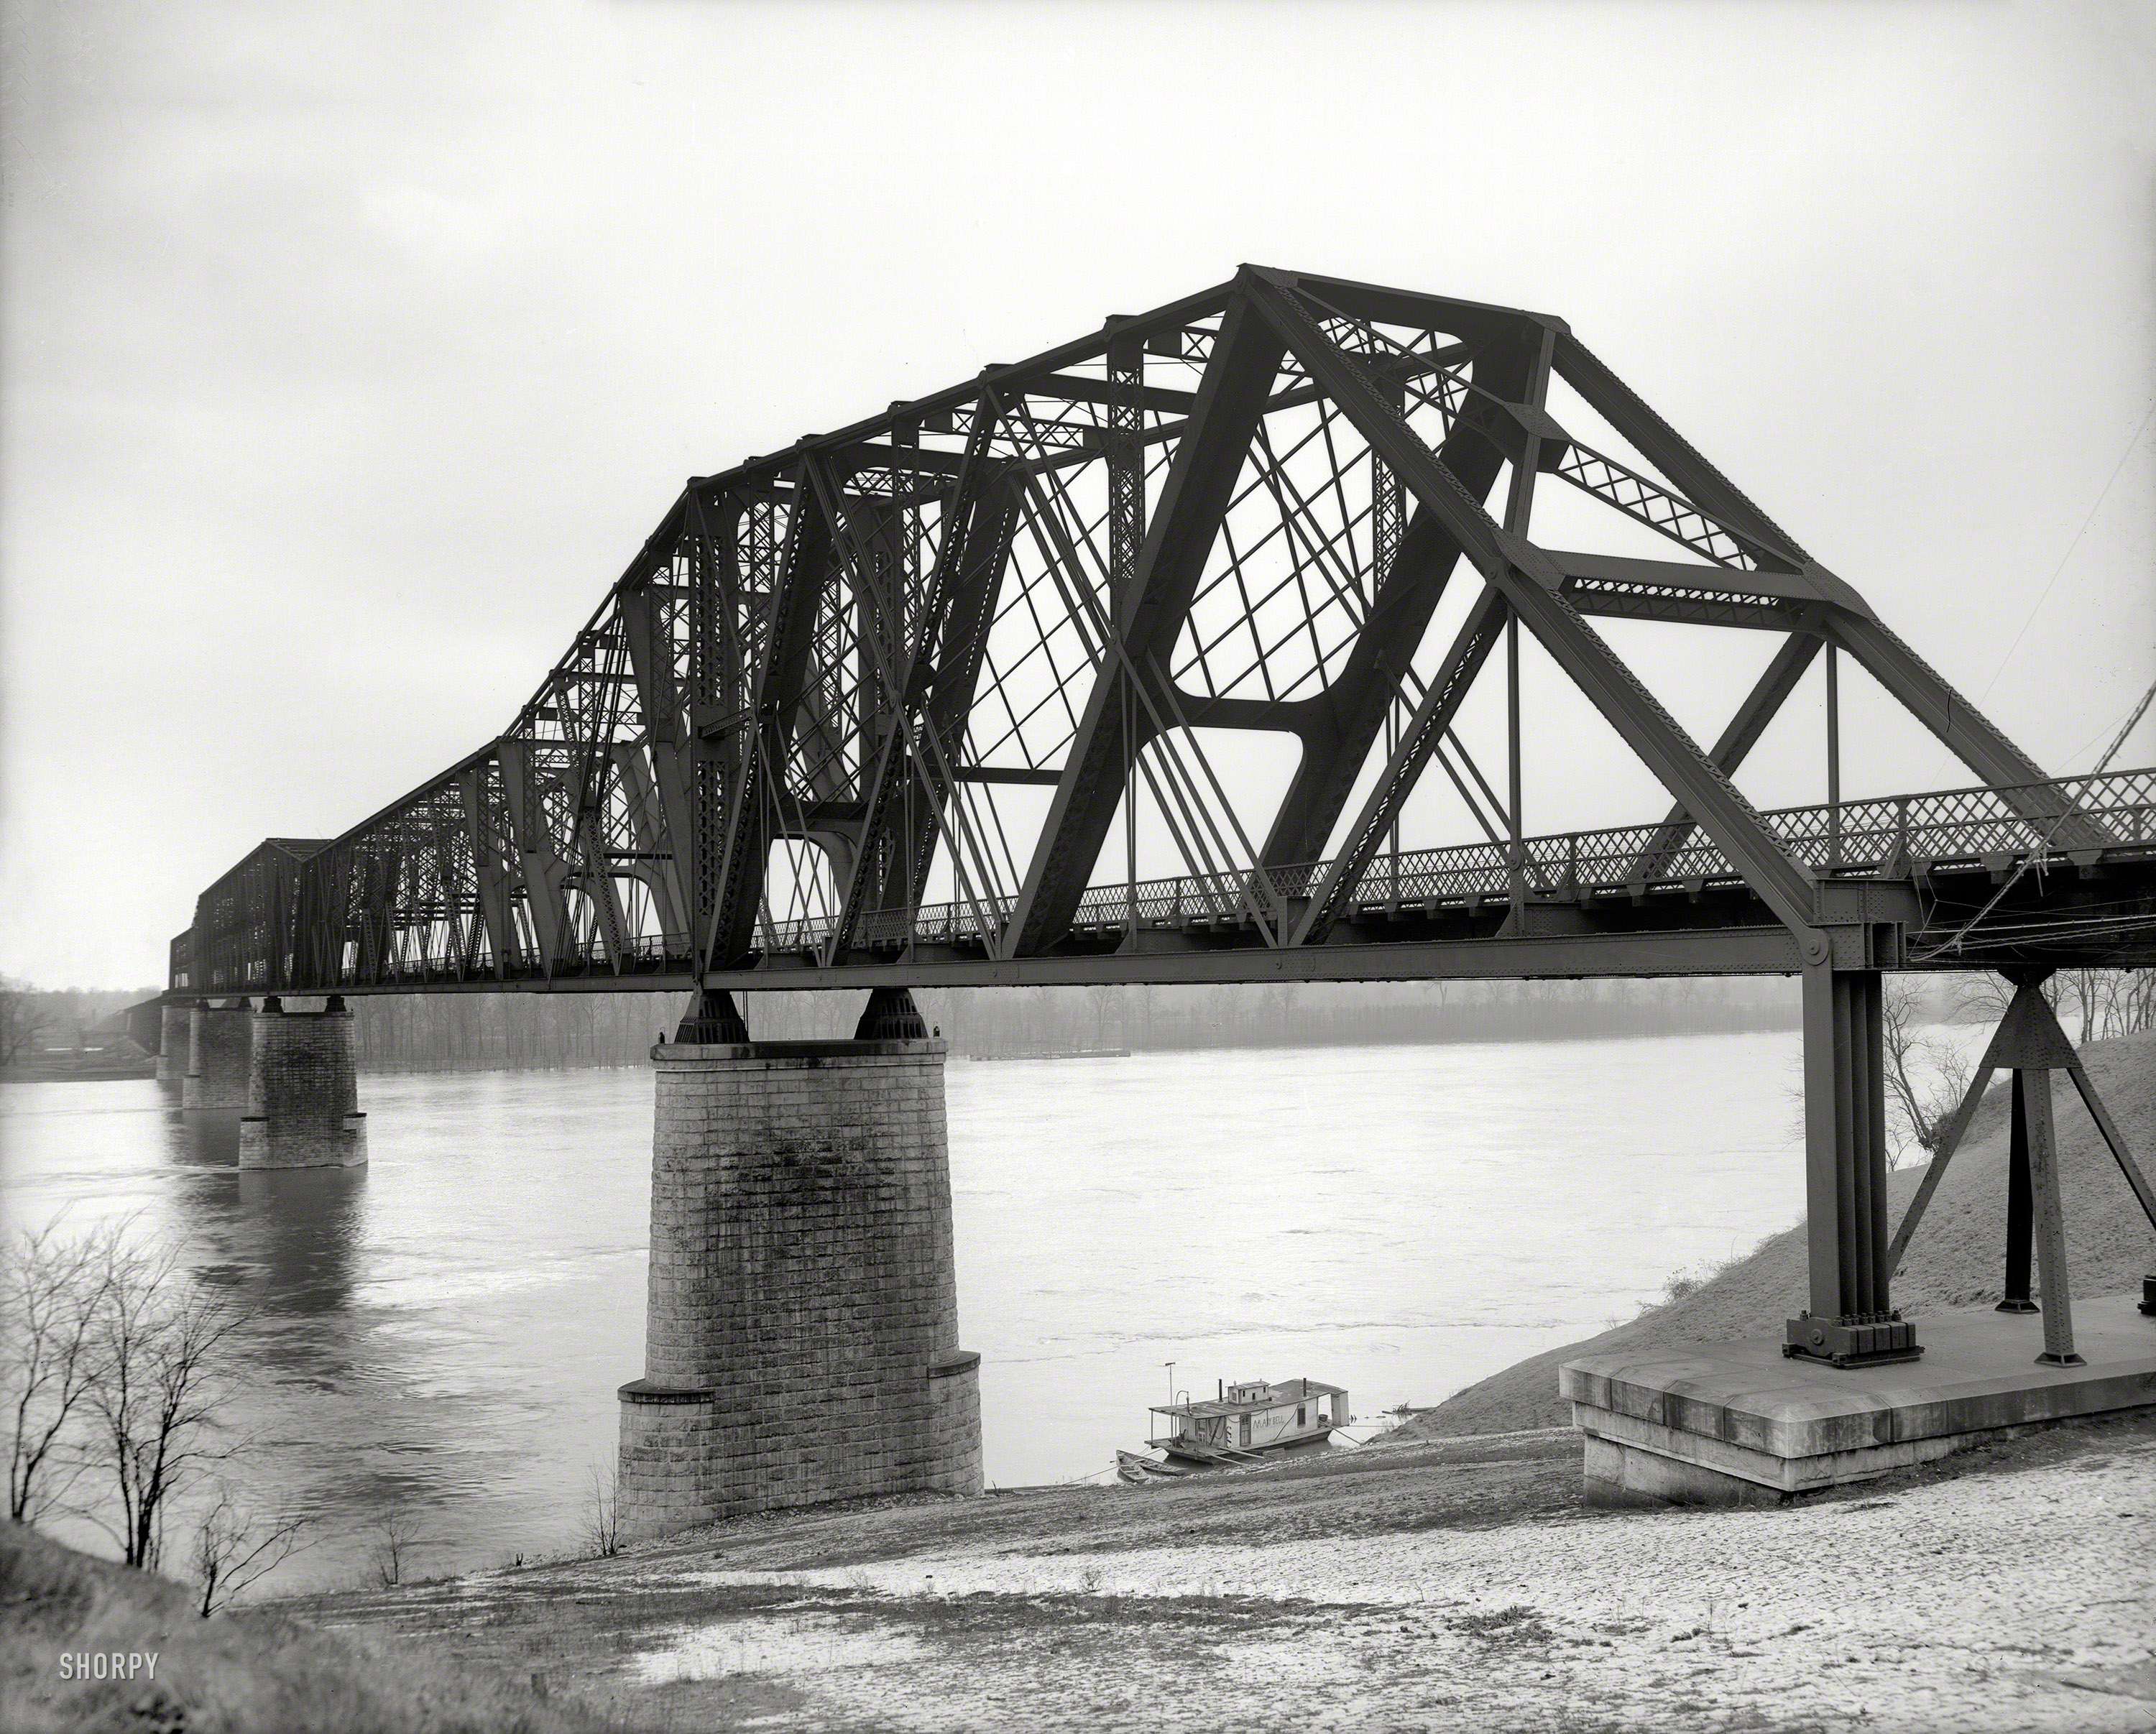 The Mississippi River circa 1906. "Kansas City & Memphis Railway bridge at Memphis, Tennessee." Where you'll find the Mary Bell. 8x10 inch dry plate glass negative, Detroit Publishing Company. View full size.